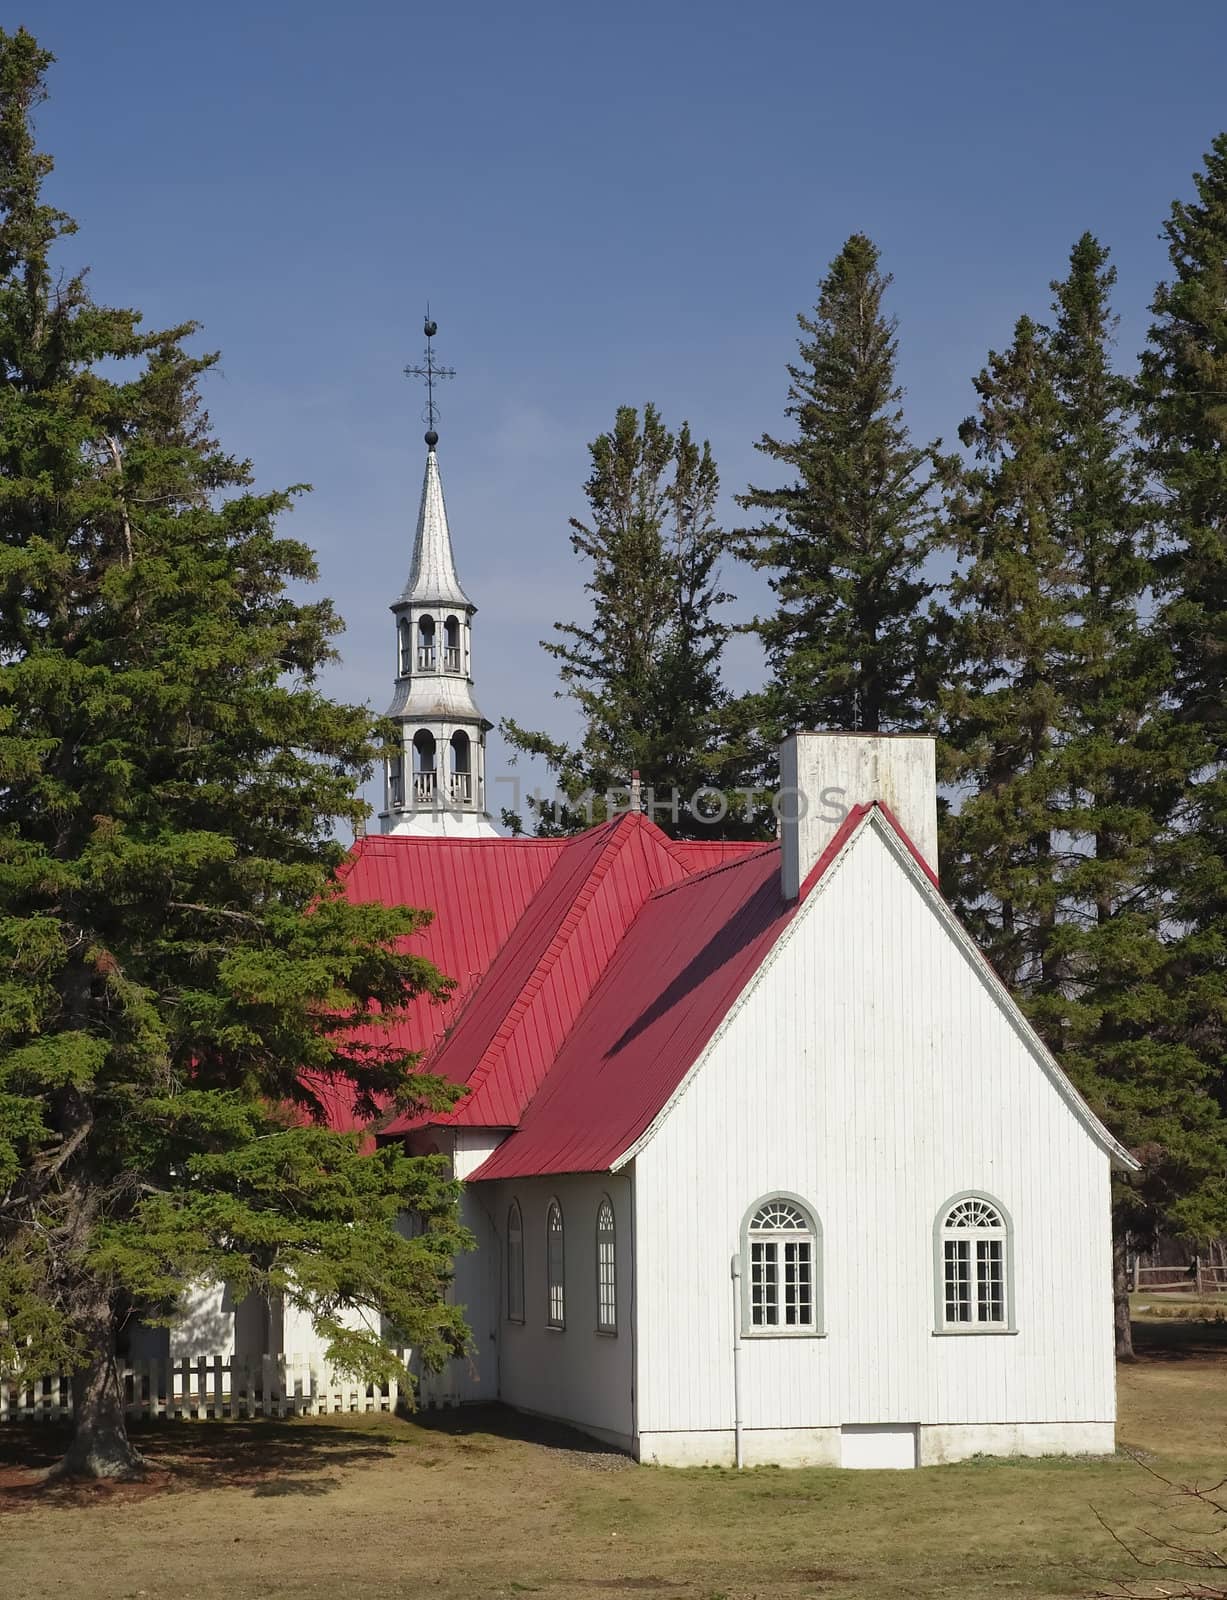 a small chapel with a red roof surrounded by trees